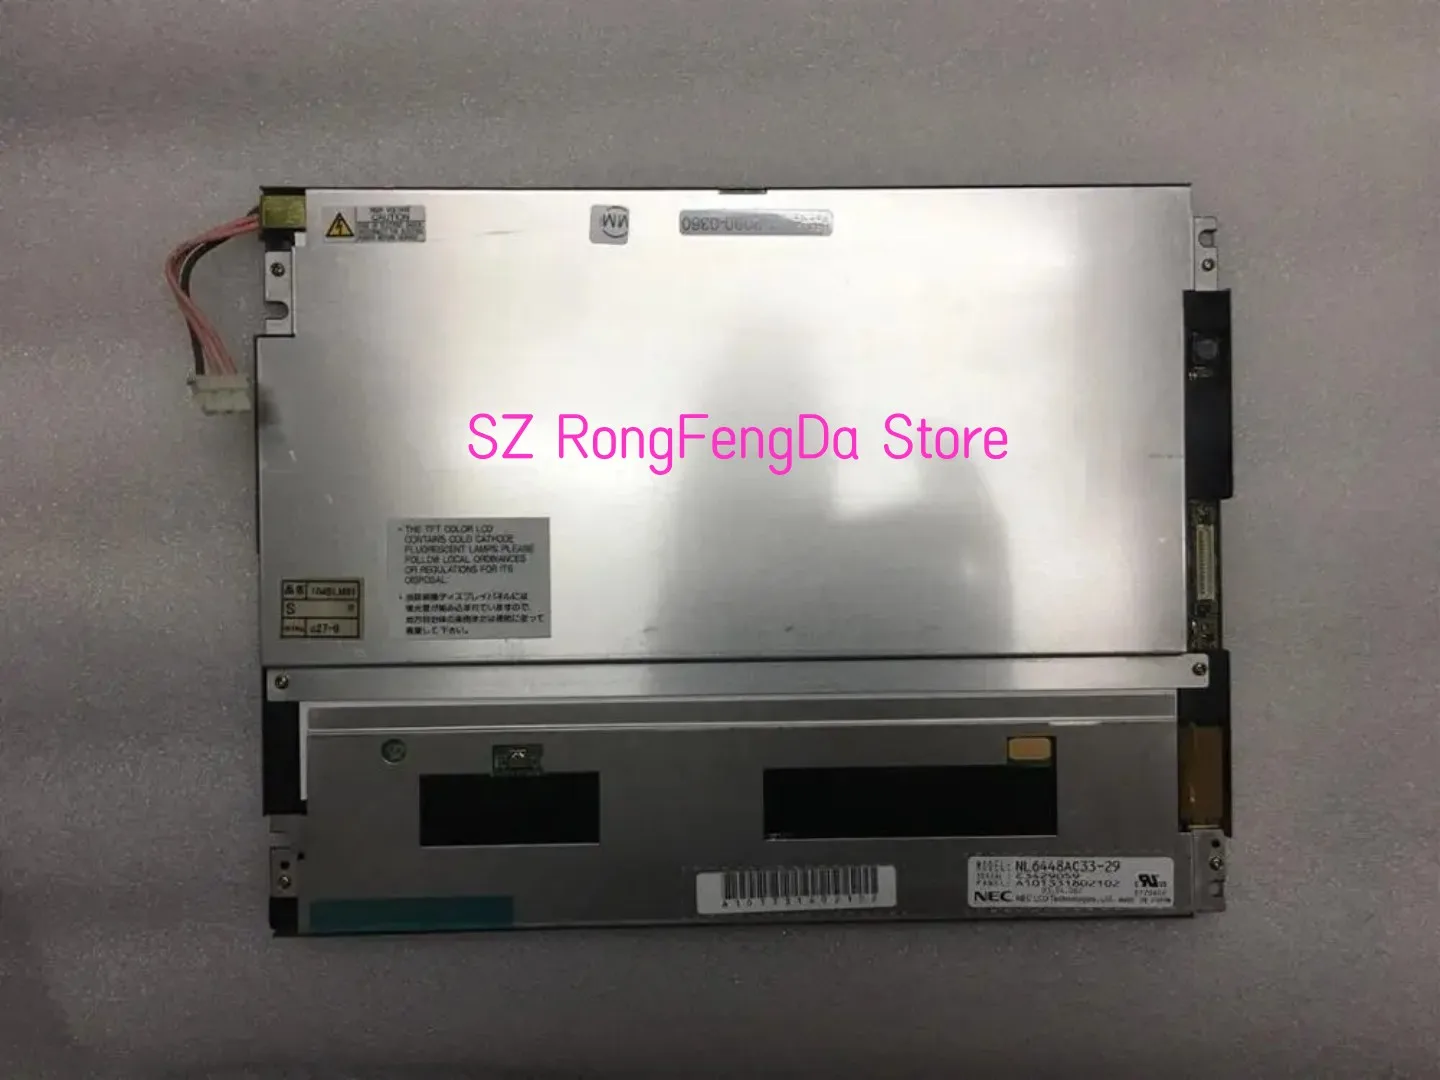 

NL6448AC33-29 10.4 inch 640*480 LCD Display Screen for Industrial Equipment